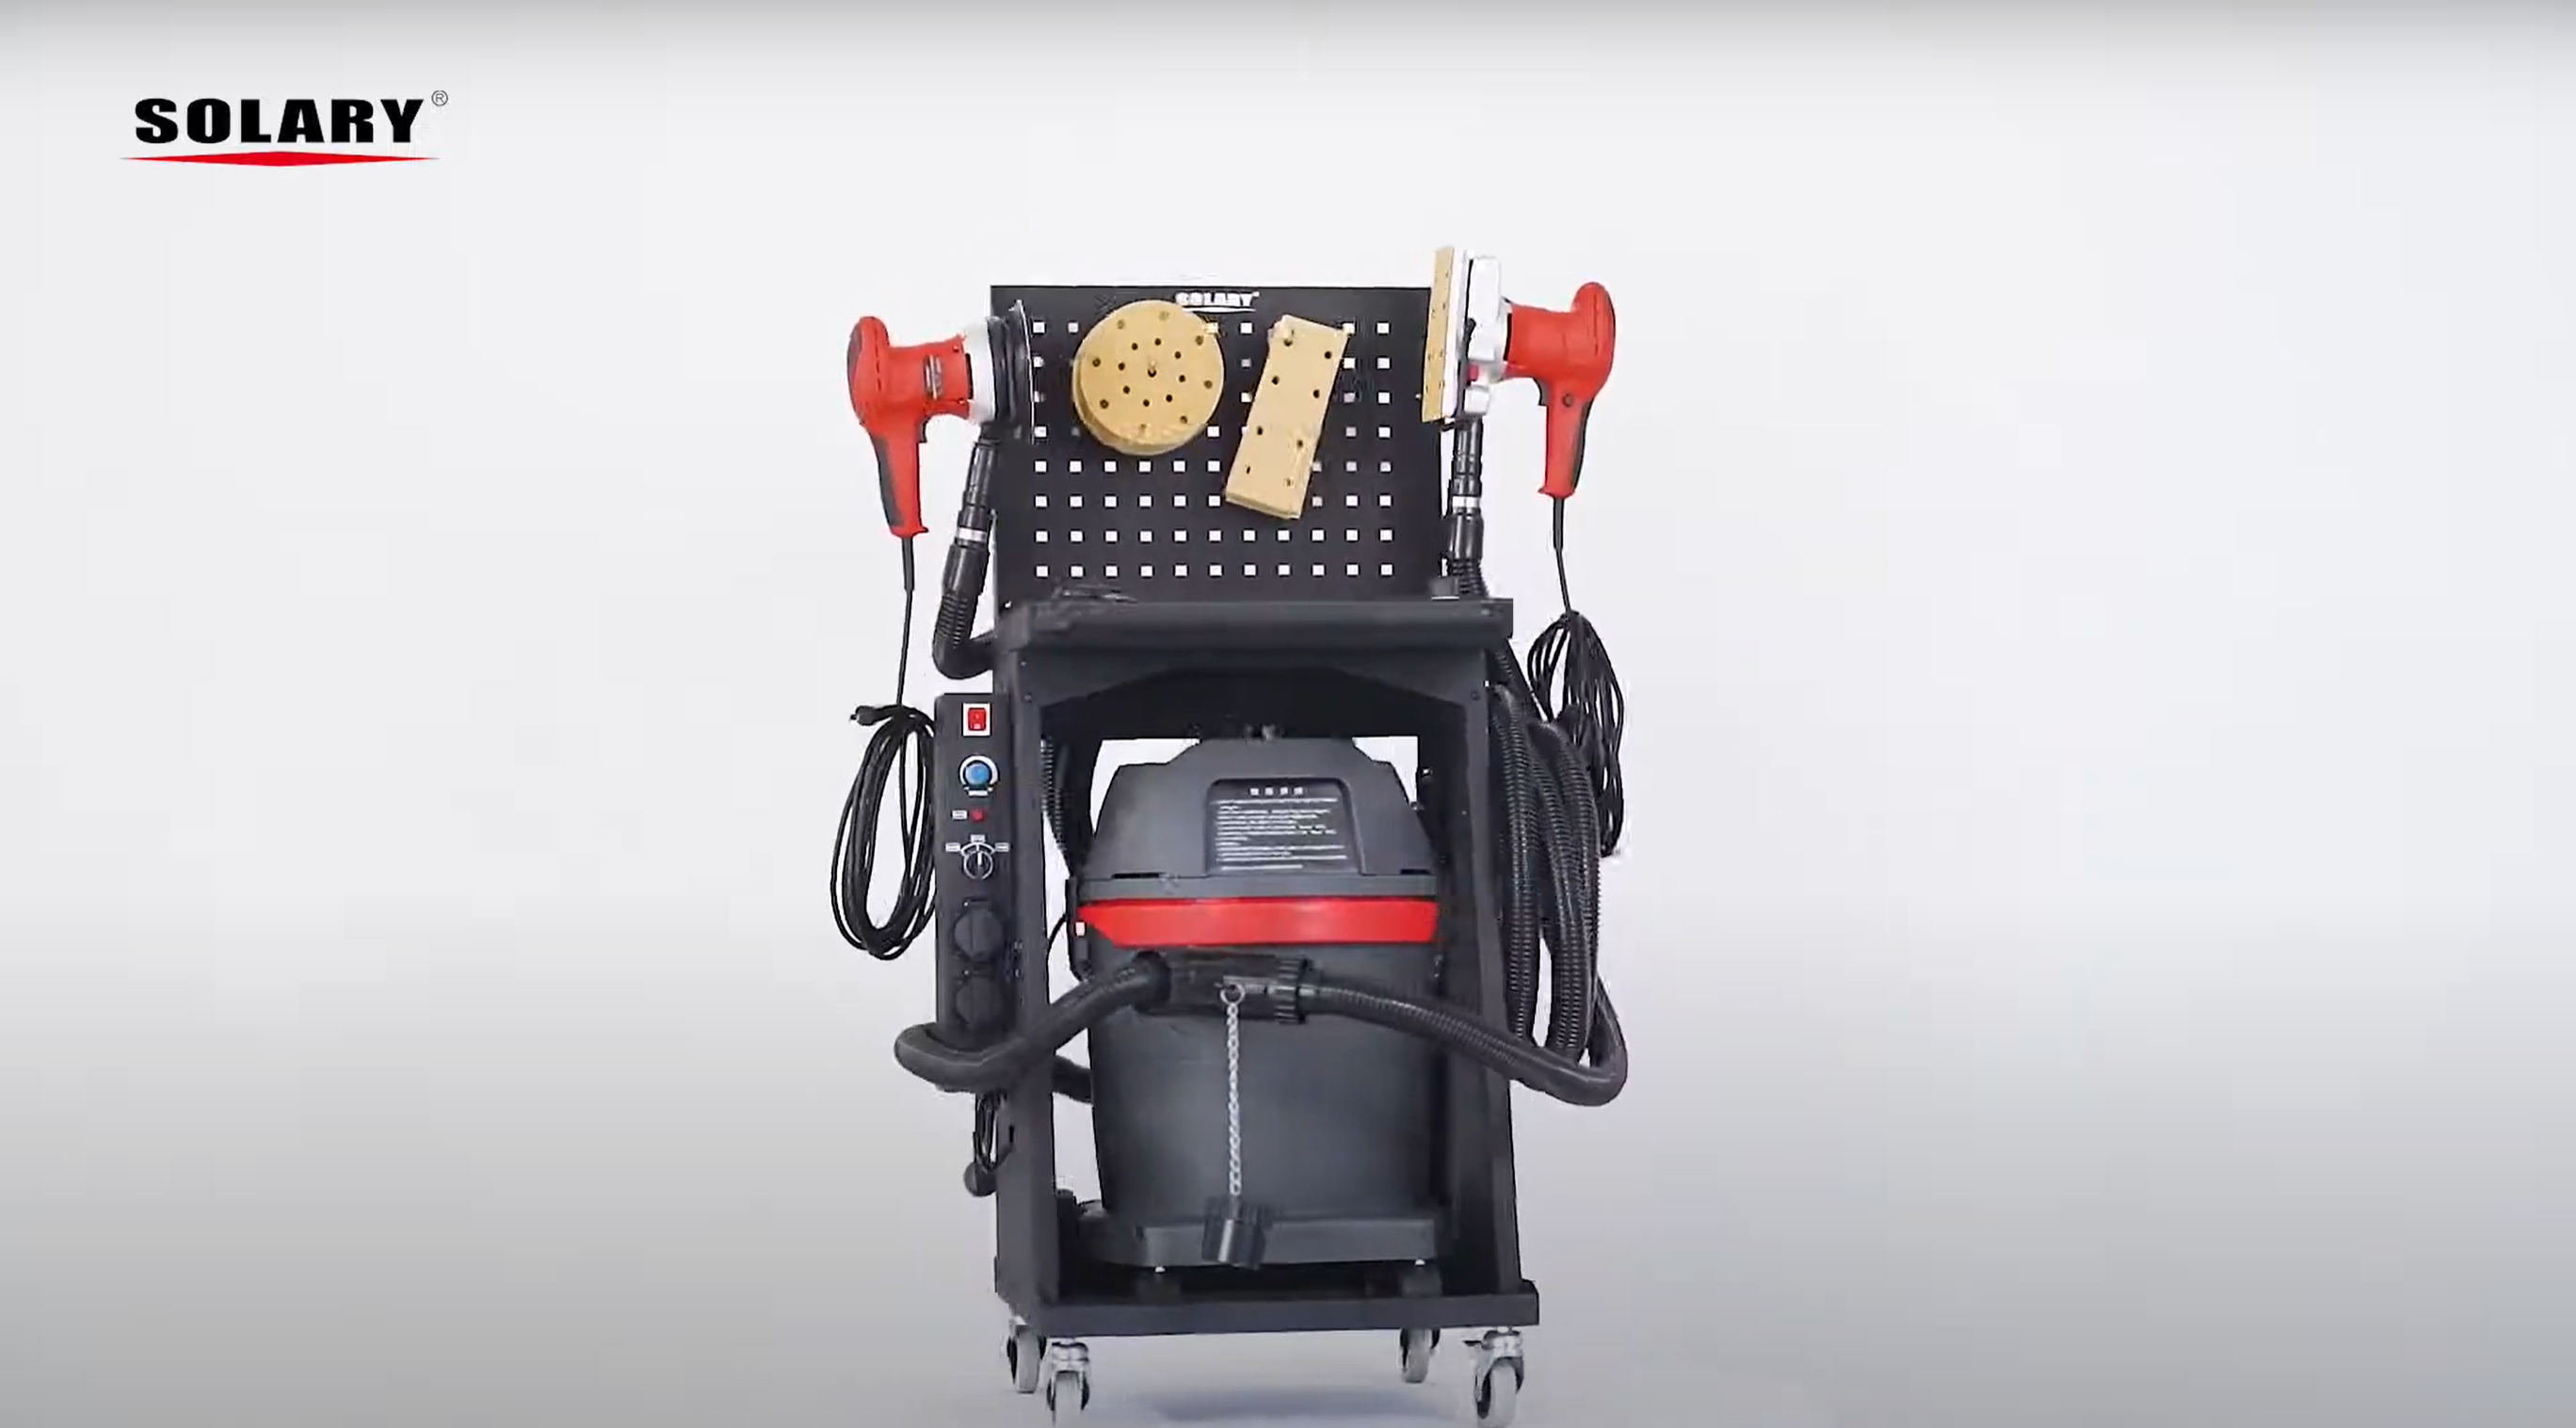 Solary Electricals Dust-free Sanding System